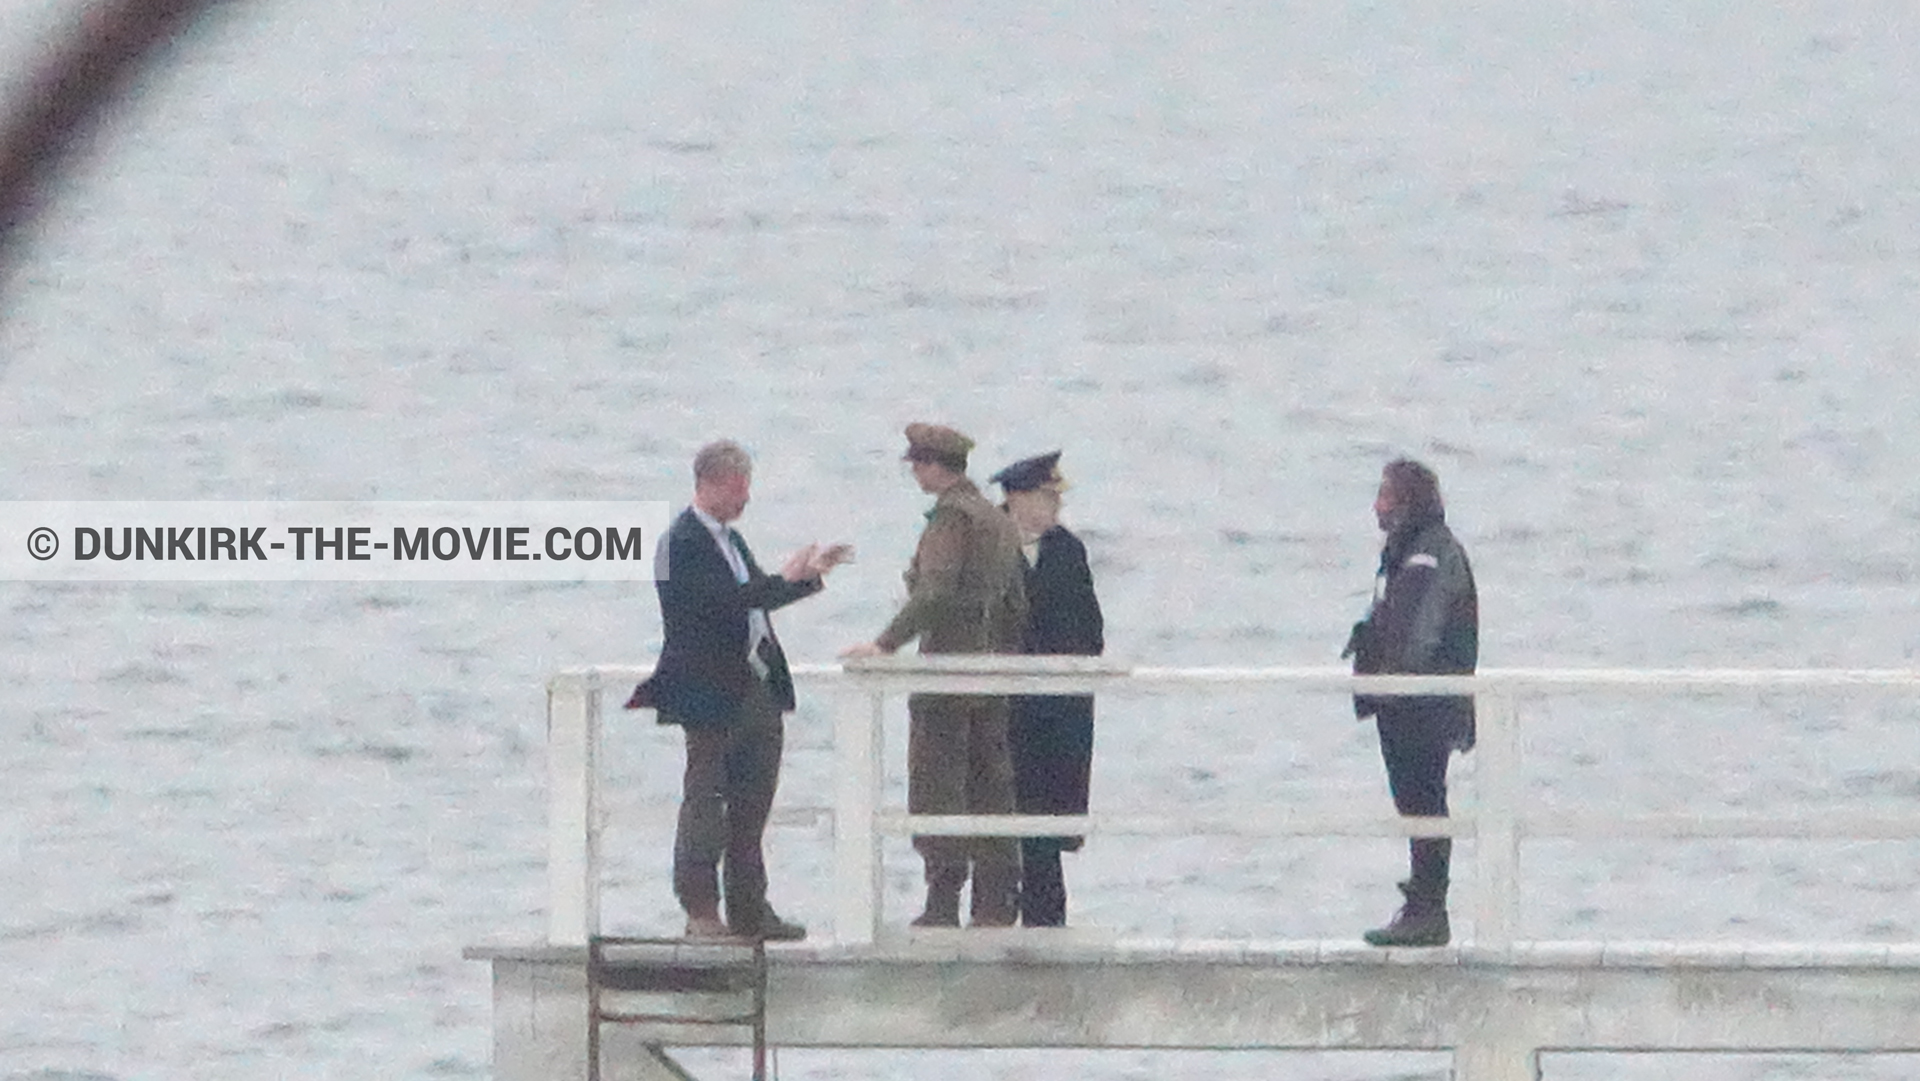 Picture with actor, Hoyte van Hoytema, EST pier, Kenneth Branagh, Christopher Nolan,  from behind the scene of the Dunkirk movie by Nolan